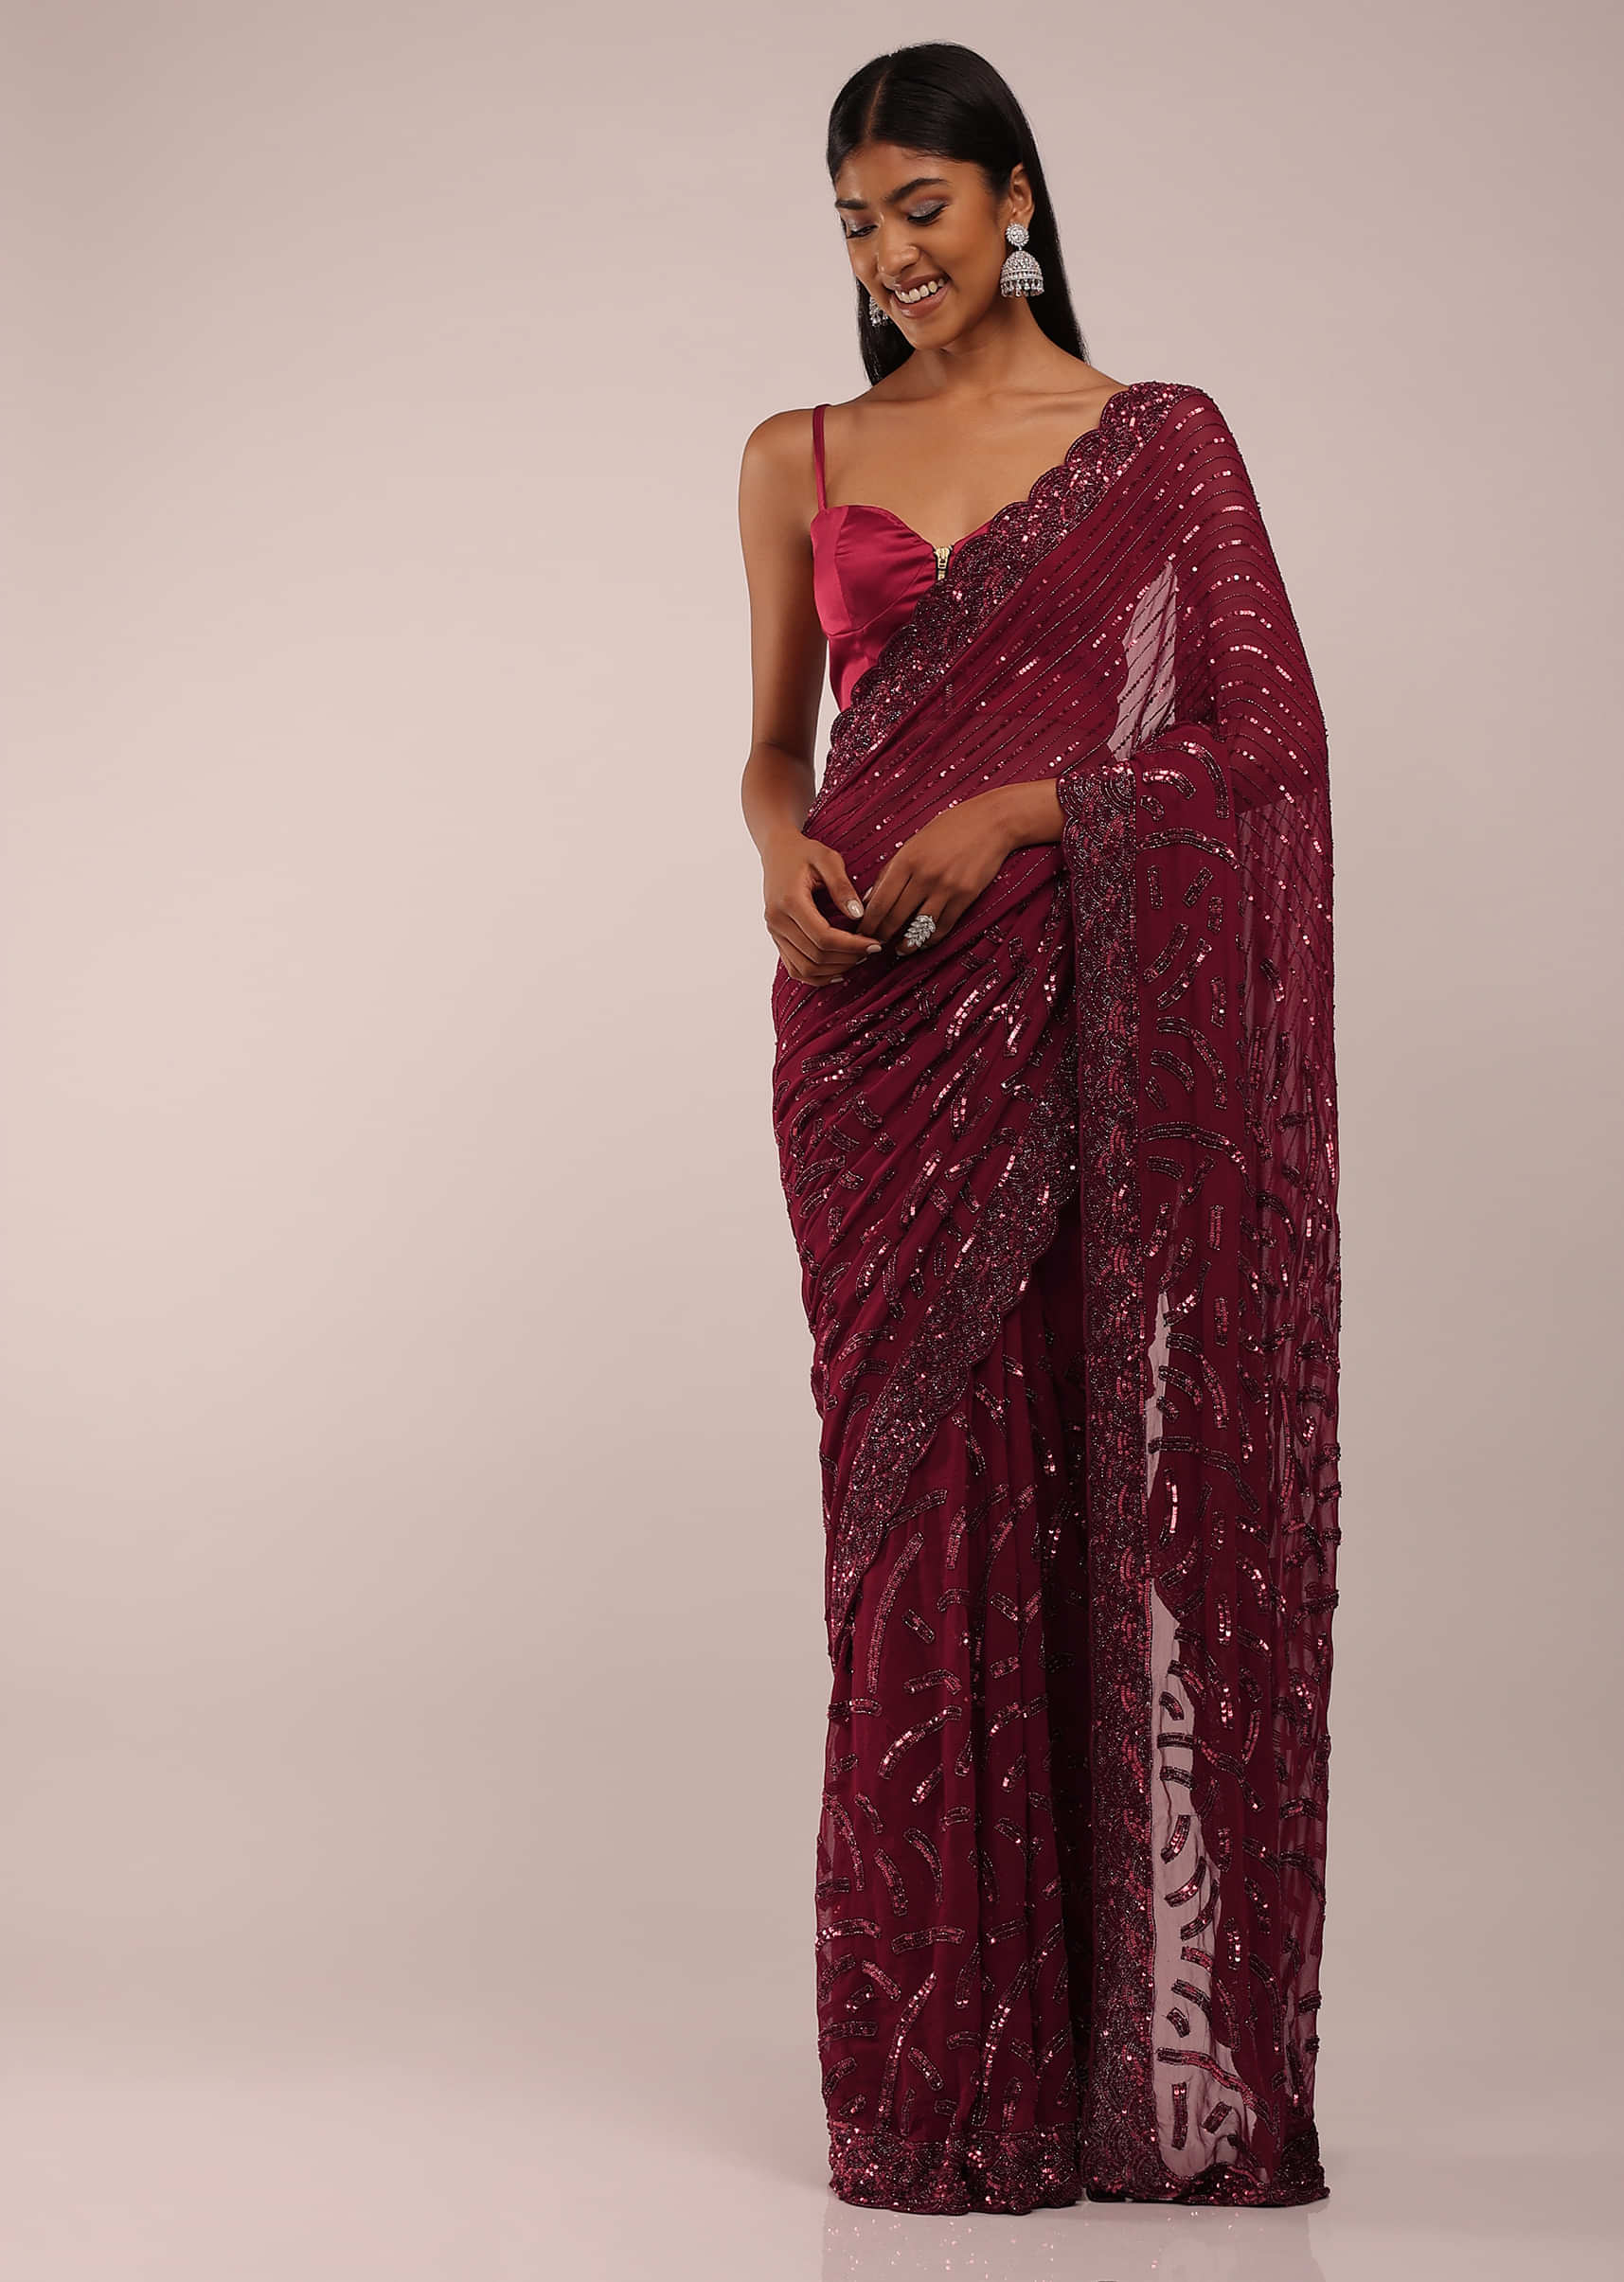 Red Plum Saree In Cut Dana And Sequins Embroidery With Scalloped Embroidered Buttis On The Pallu Border